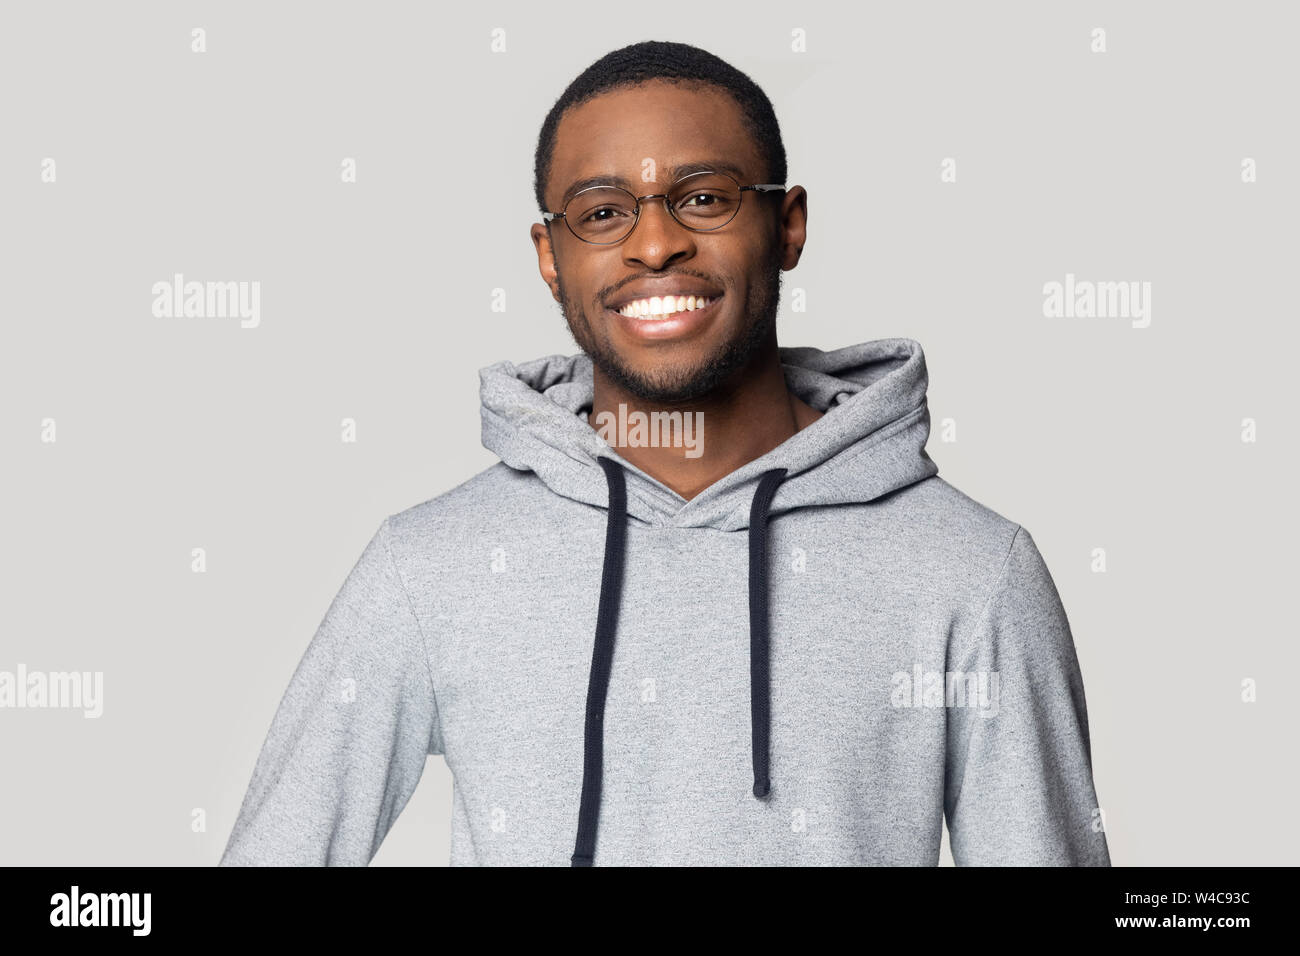 Smiling black male in hoodie posing for picture Stock Photo